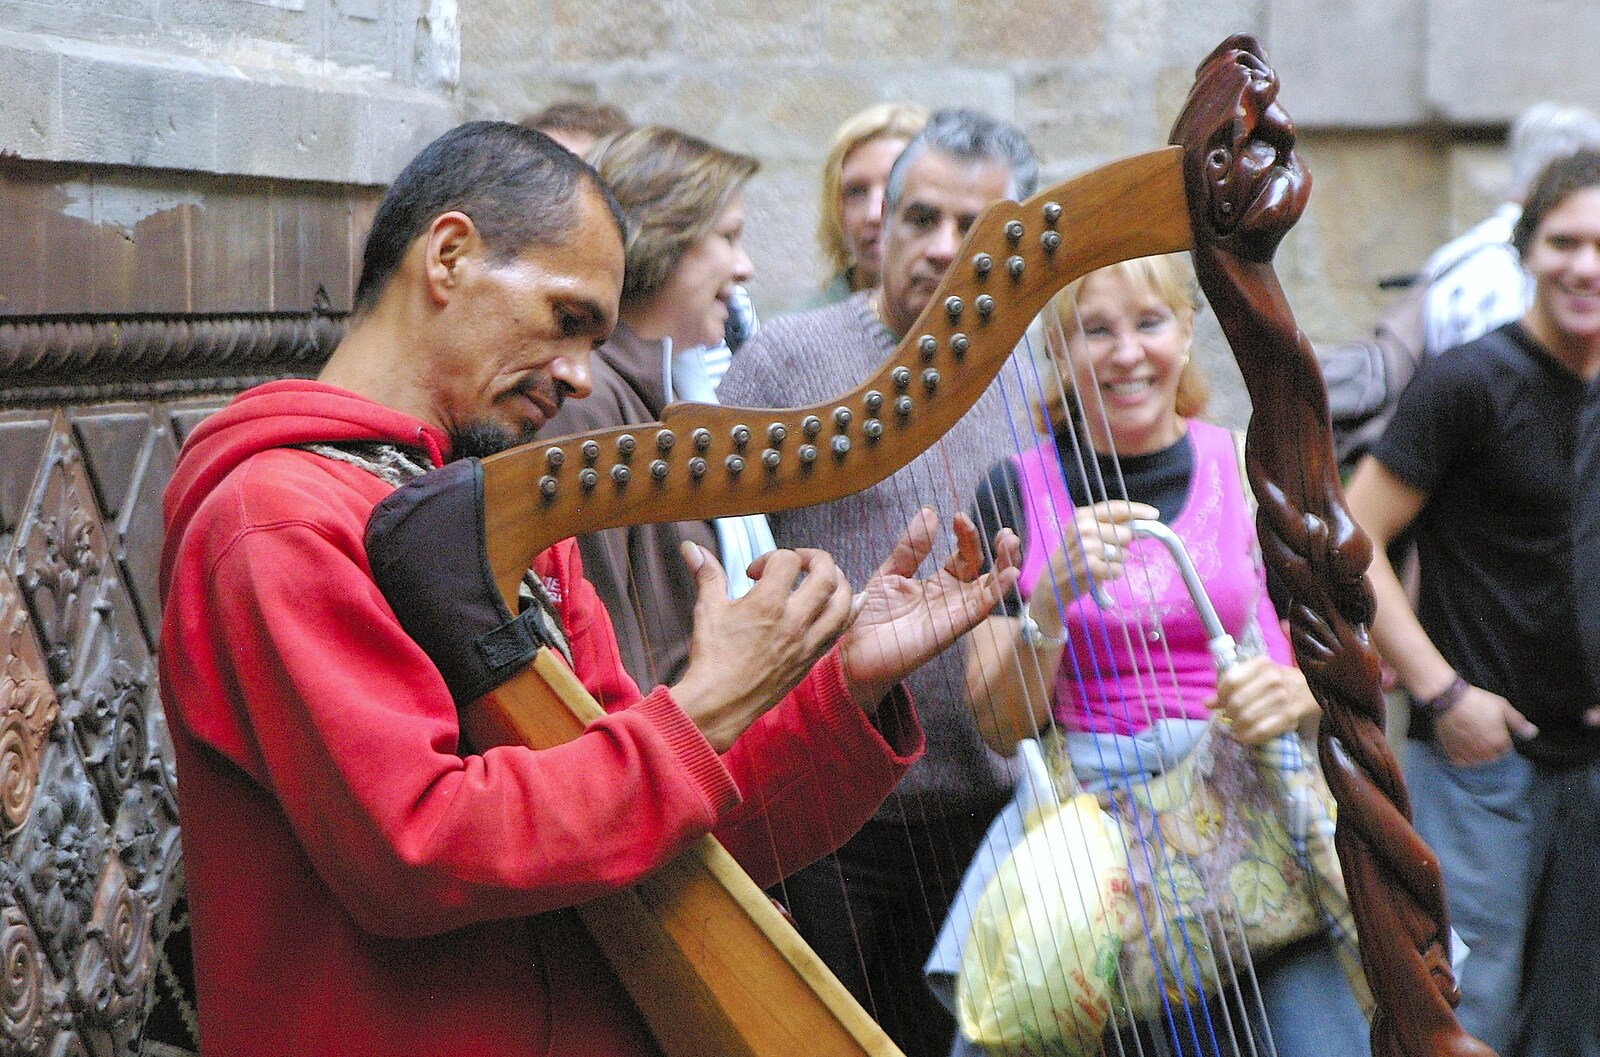 A harpist entertains passers-by from Two Days in Barcelona, Catalunya, Spain - 22nd September 2006